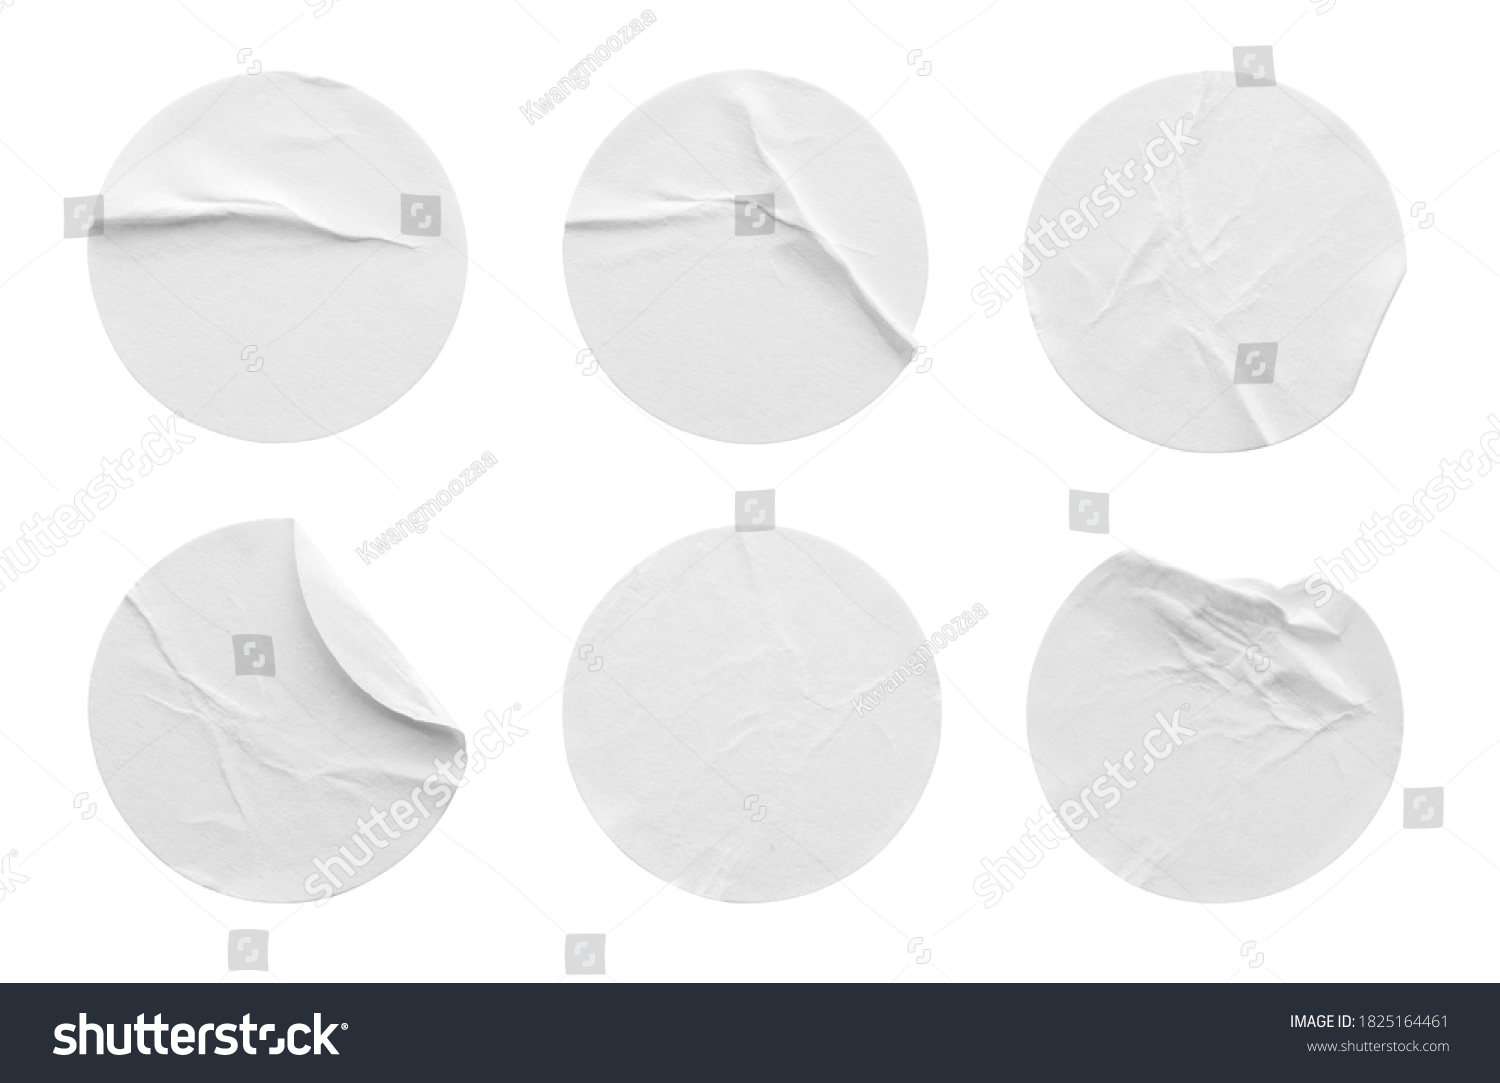 Blank white round paper sticker label set collection isolated on white background with clipping path #1825164461